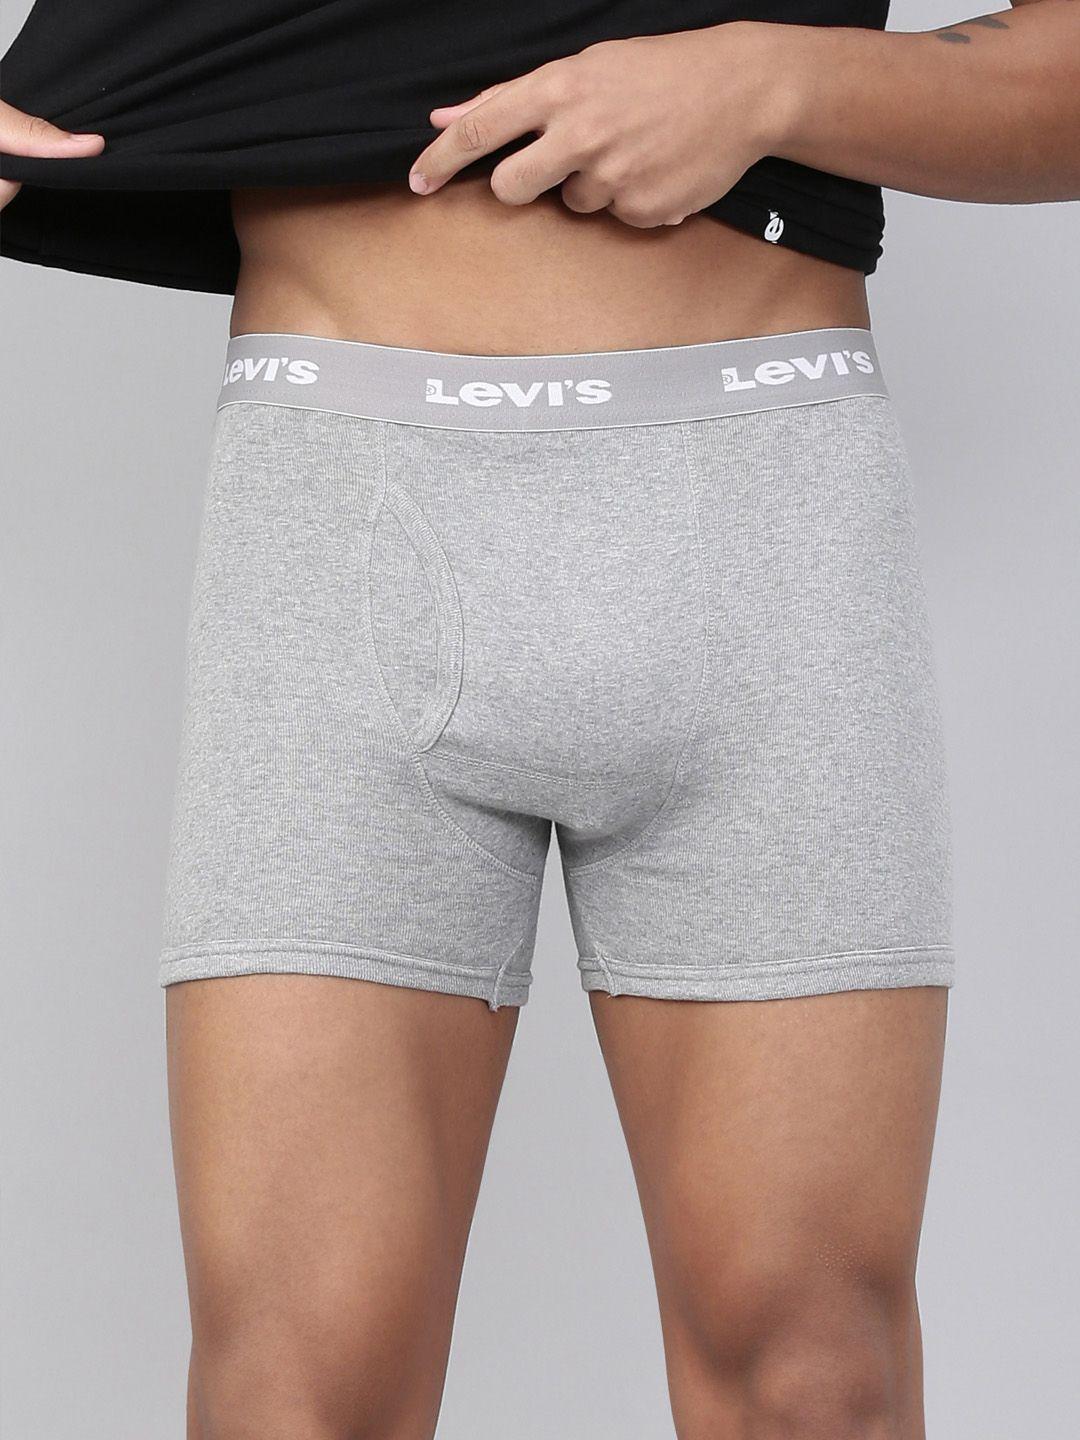 levis smartskin technology cotton trunks with tag free comfort #001-boxer brief